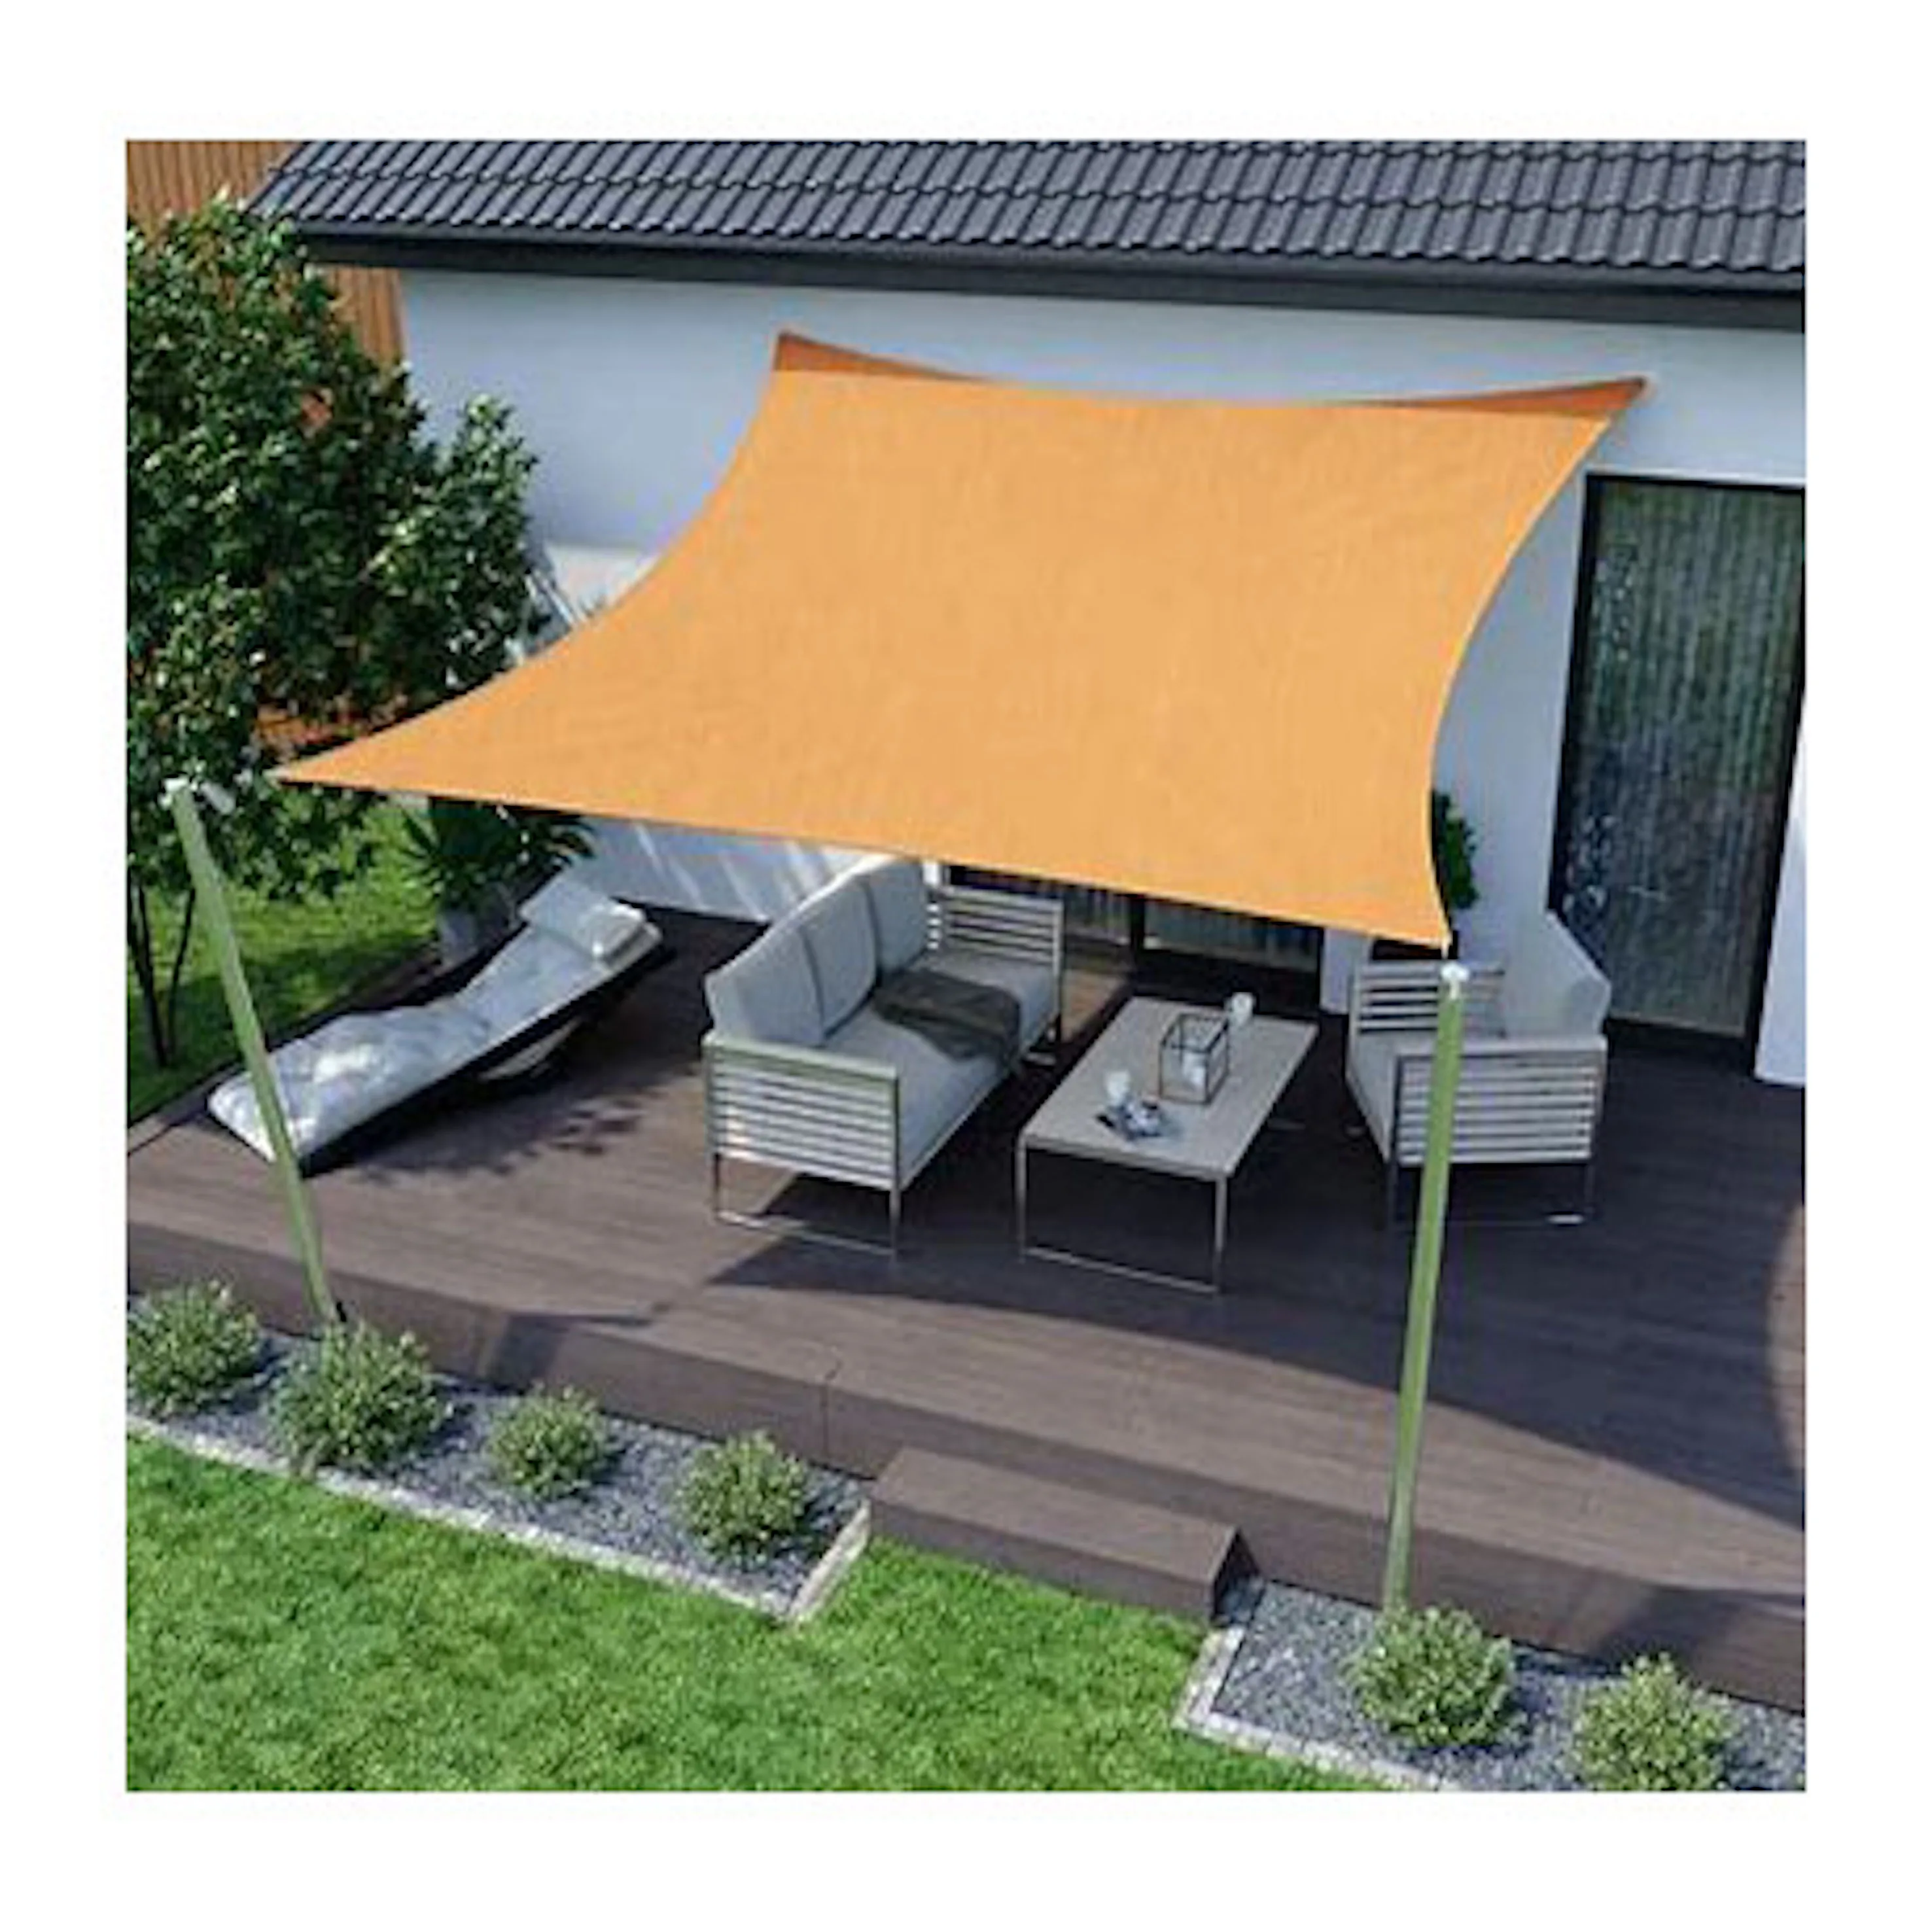 118x79 Inch Waterproof Sun Shade Rectangle Outdoor Sail Awnings For Garden Pools 